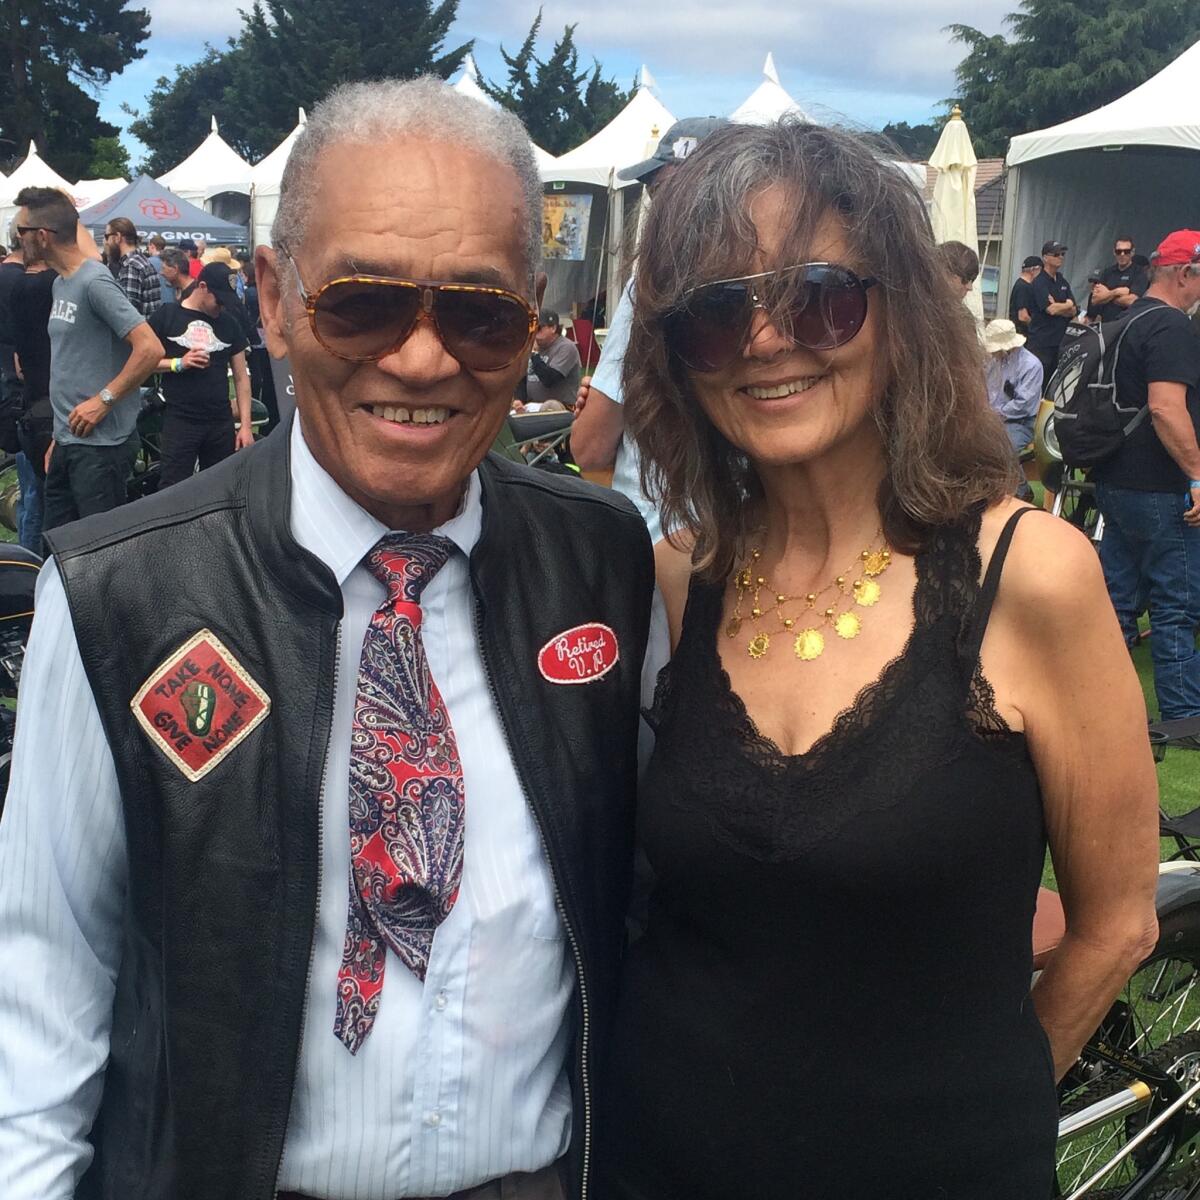 Cliff Vaughs and his "other half," Daniella Sapriel, at the Quail Motorcycle Gathering in May 2016.